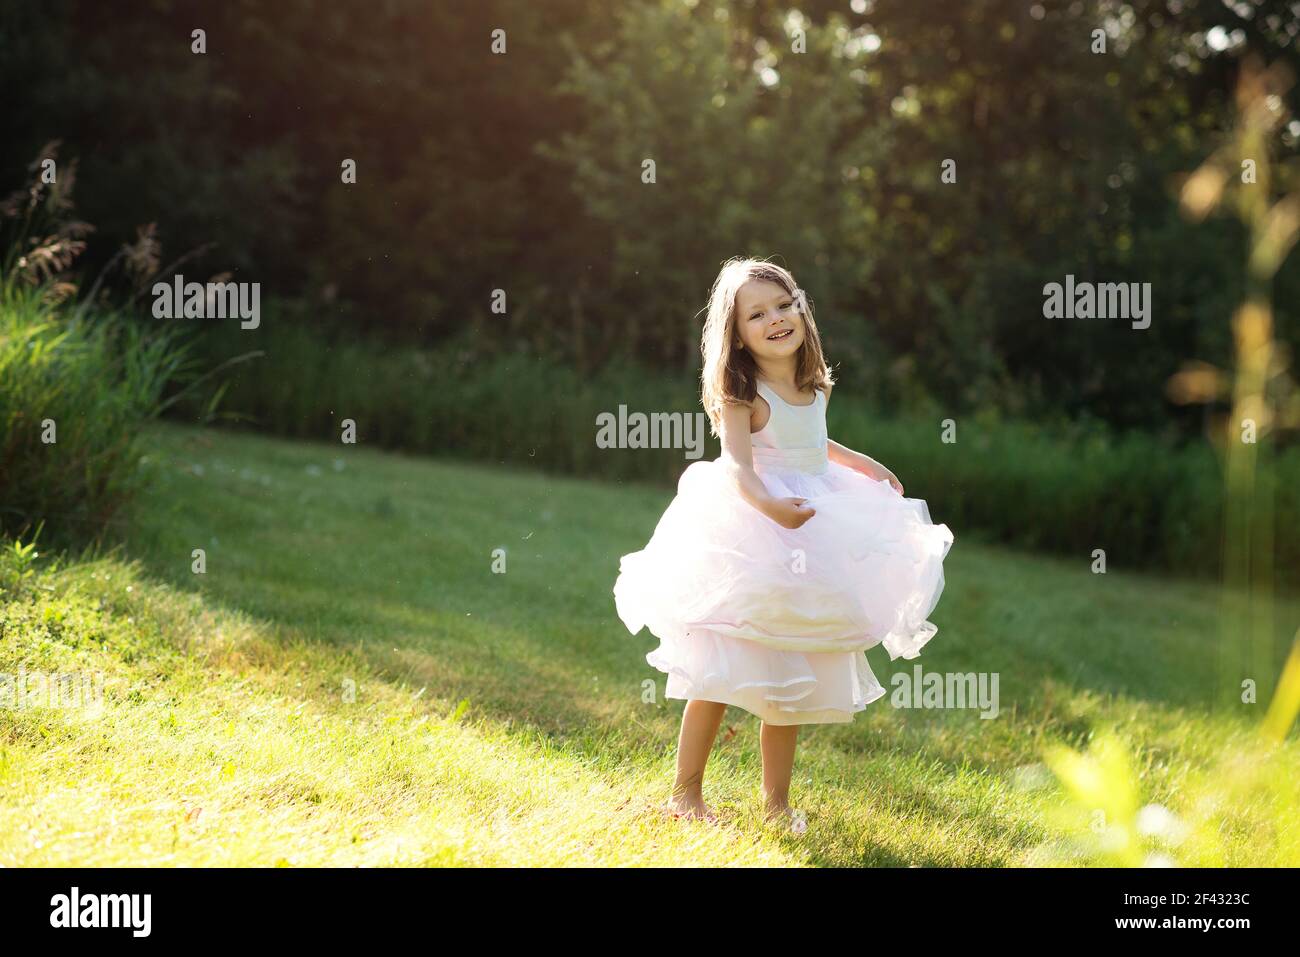 6. Little girl with blond hair and a pink dress twirling - wide 7